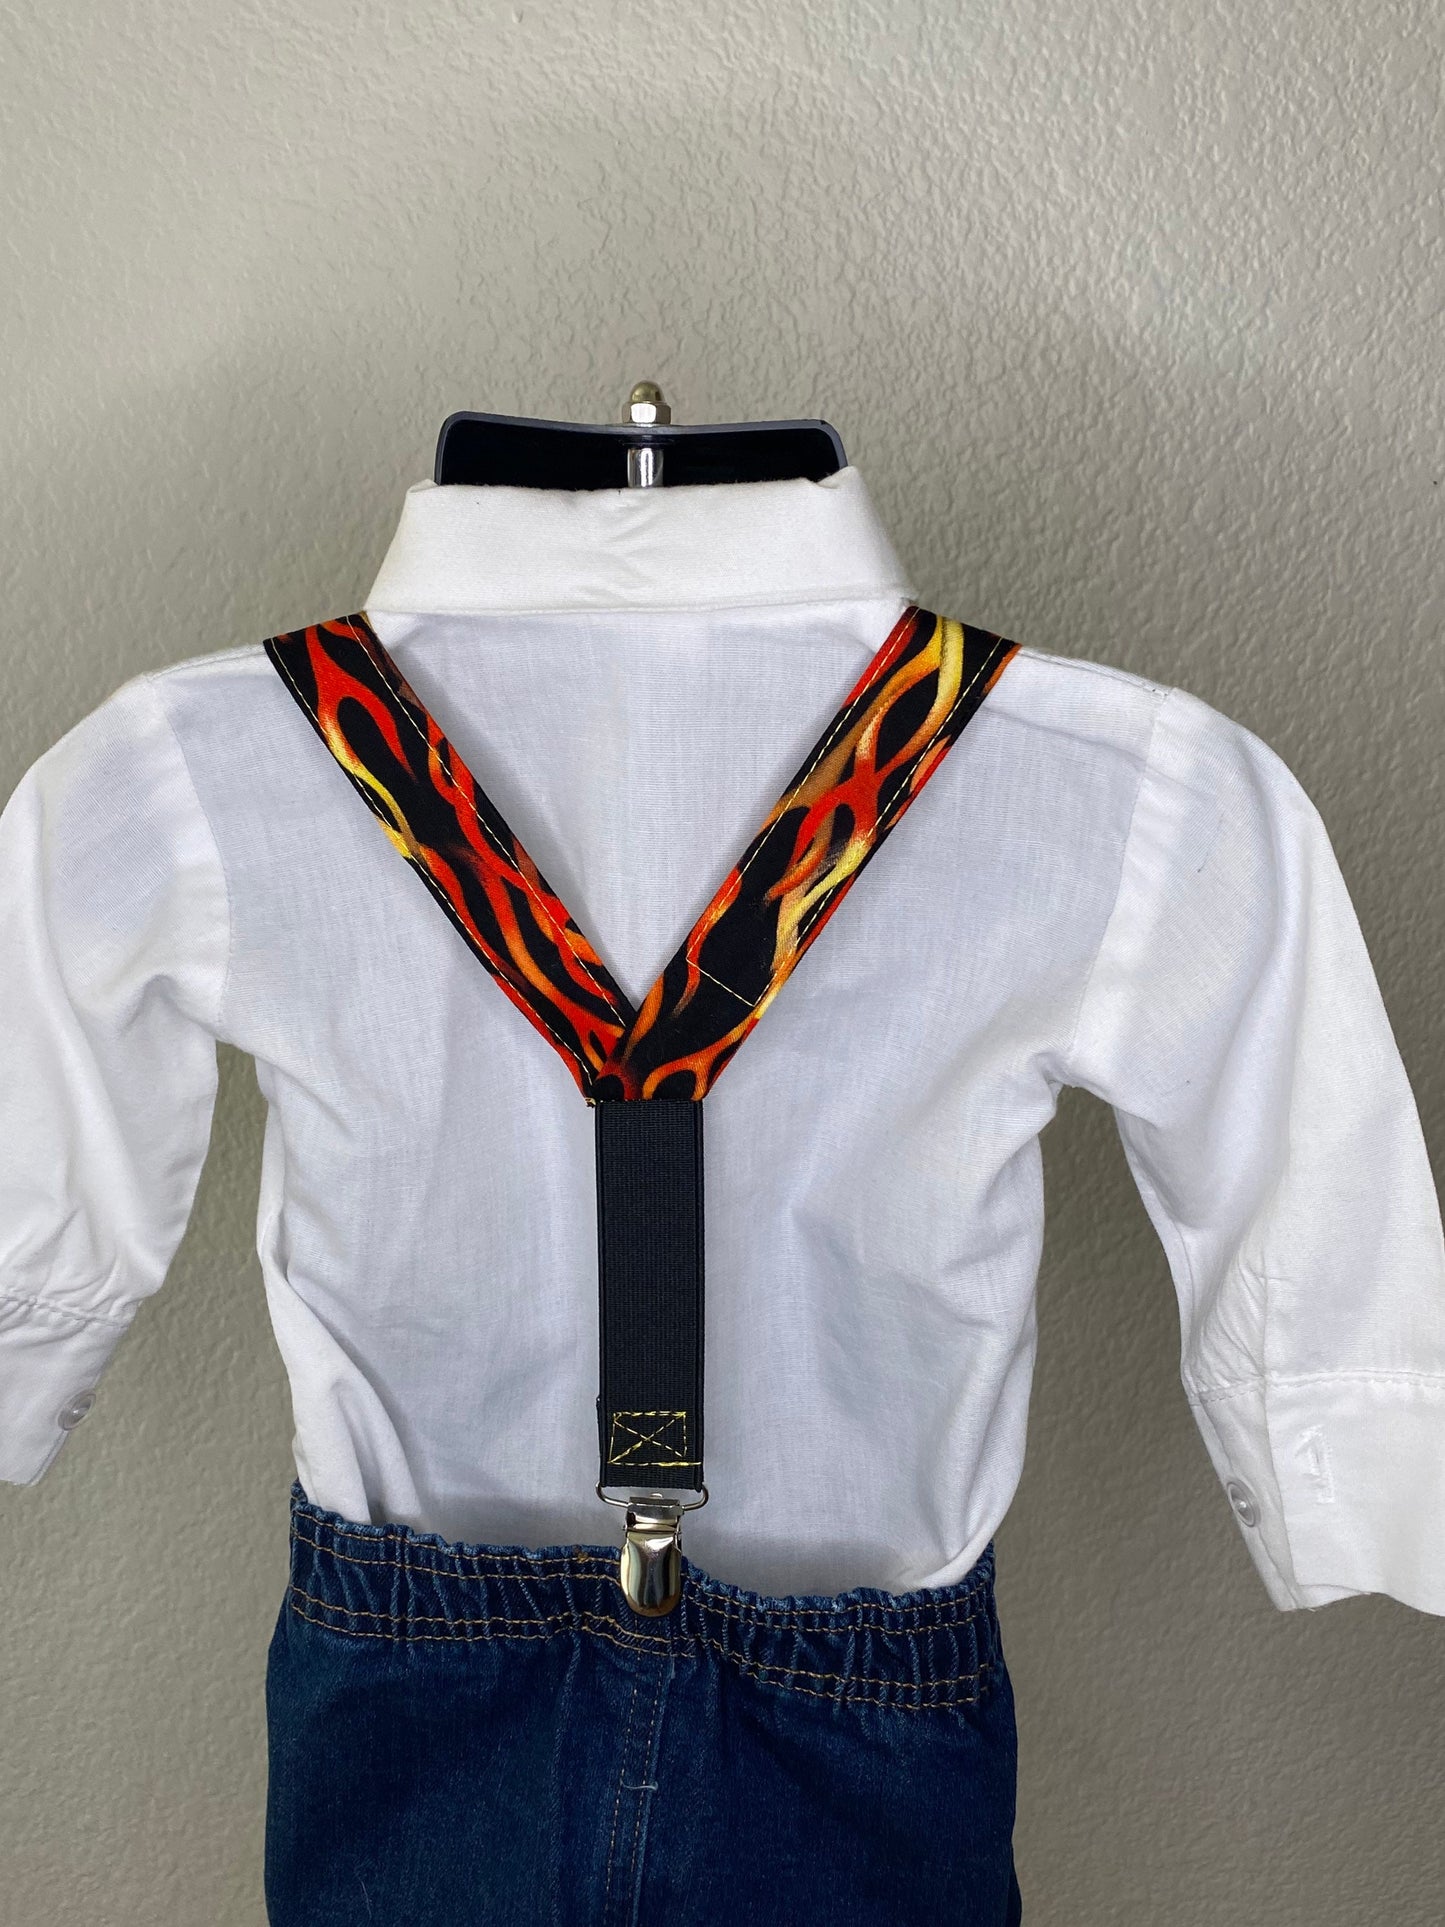 Flames suspenders and bow tie / Infant, Toddler, Child, Teen, Adult, Big & Tall